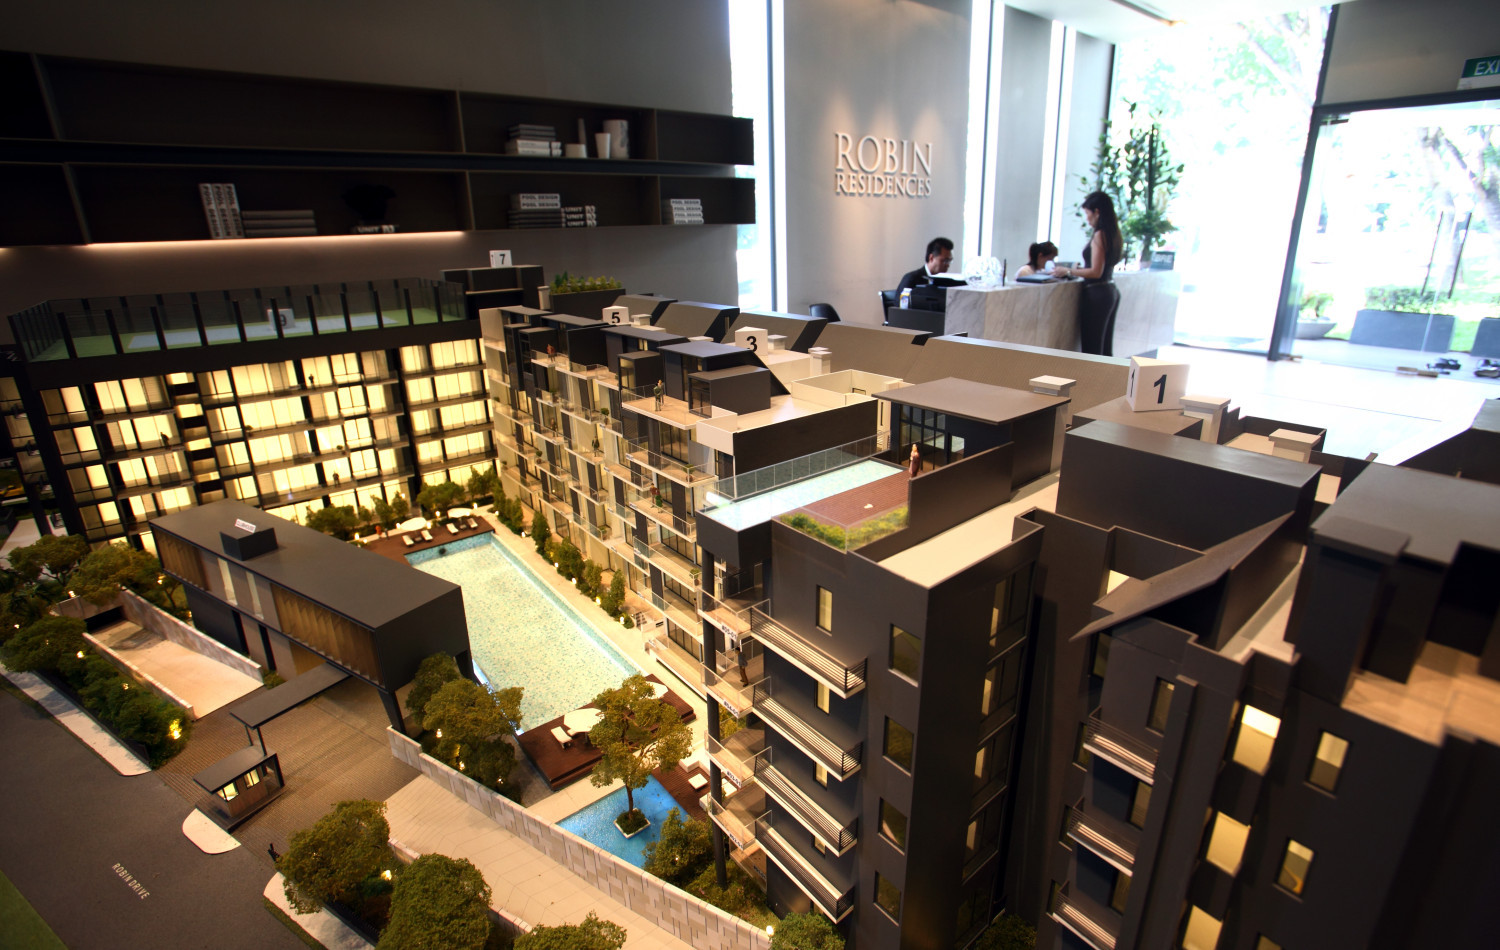 Robin Residences’ sales gallery to close - Property News